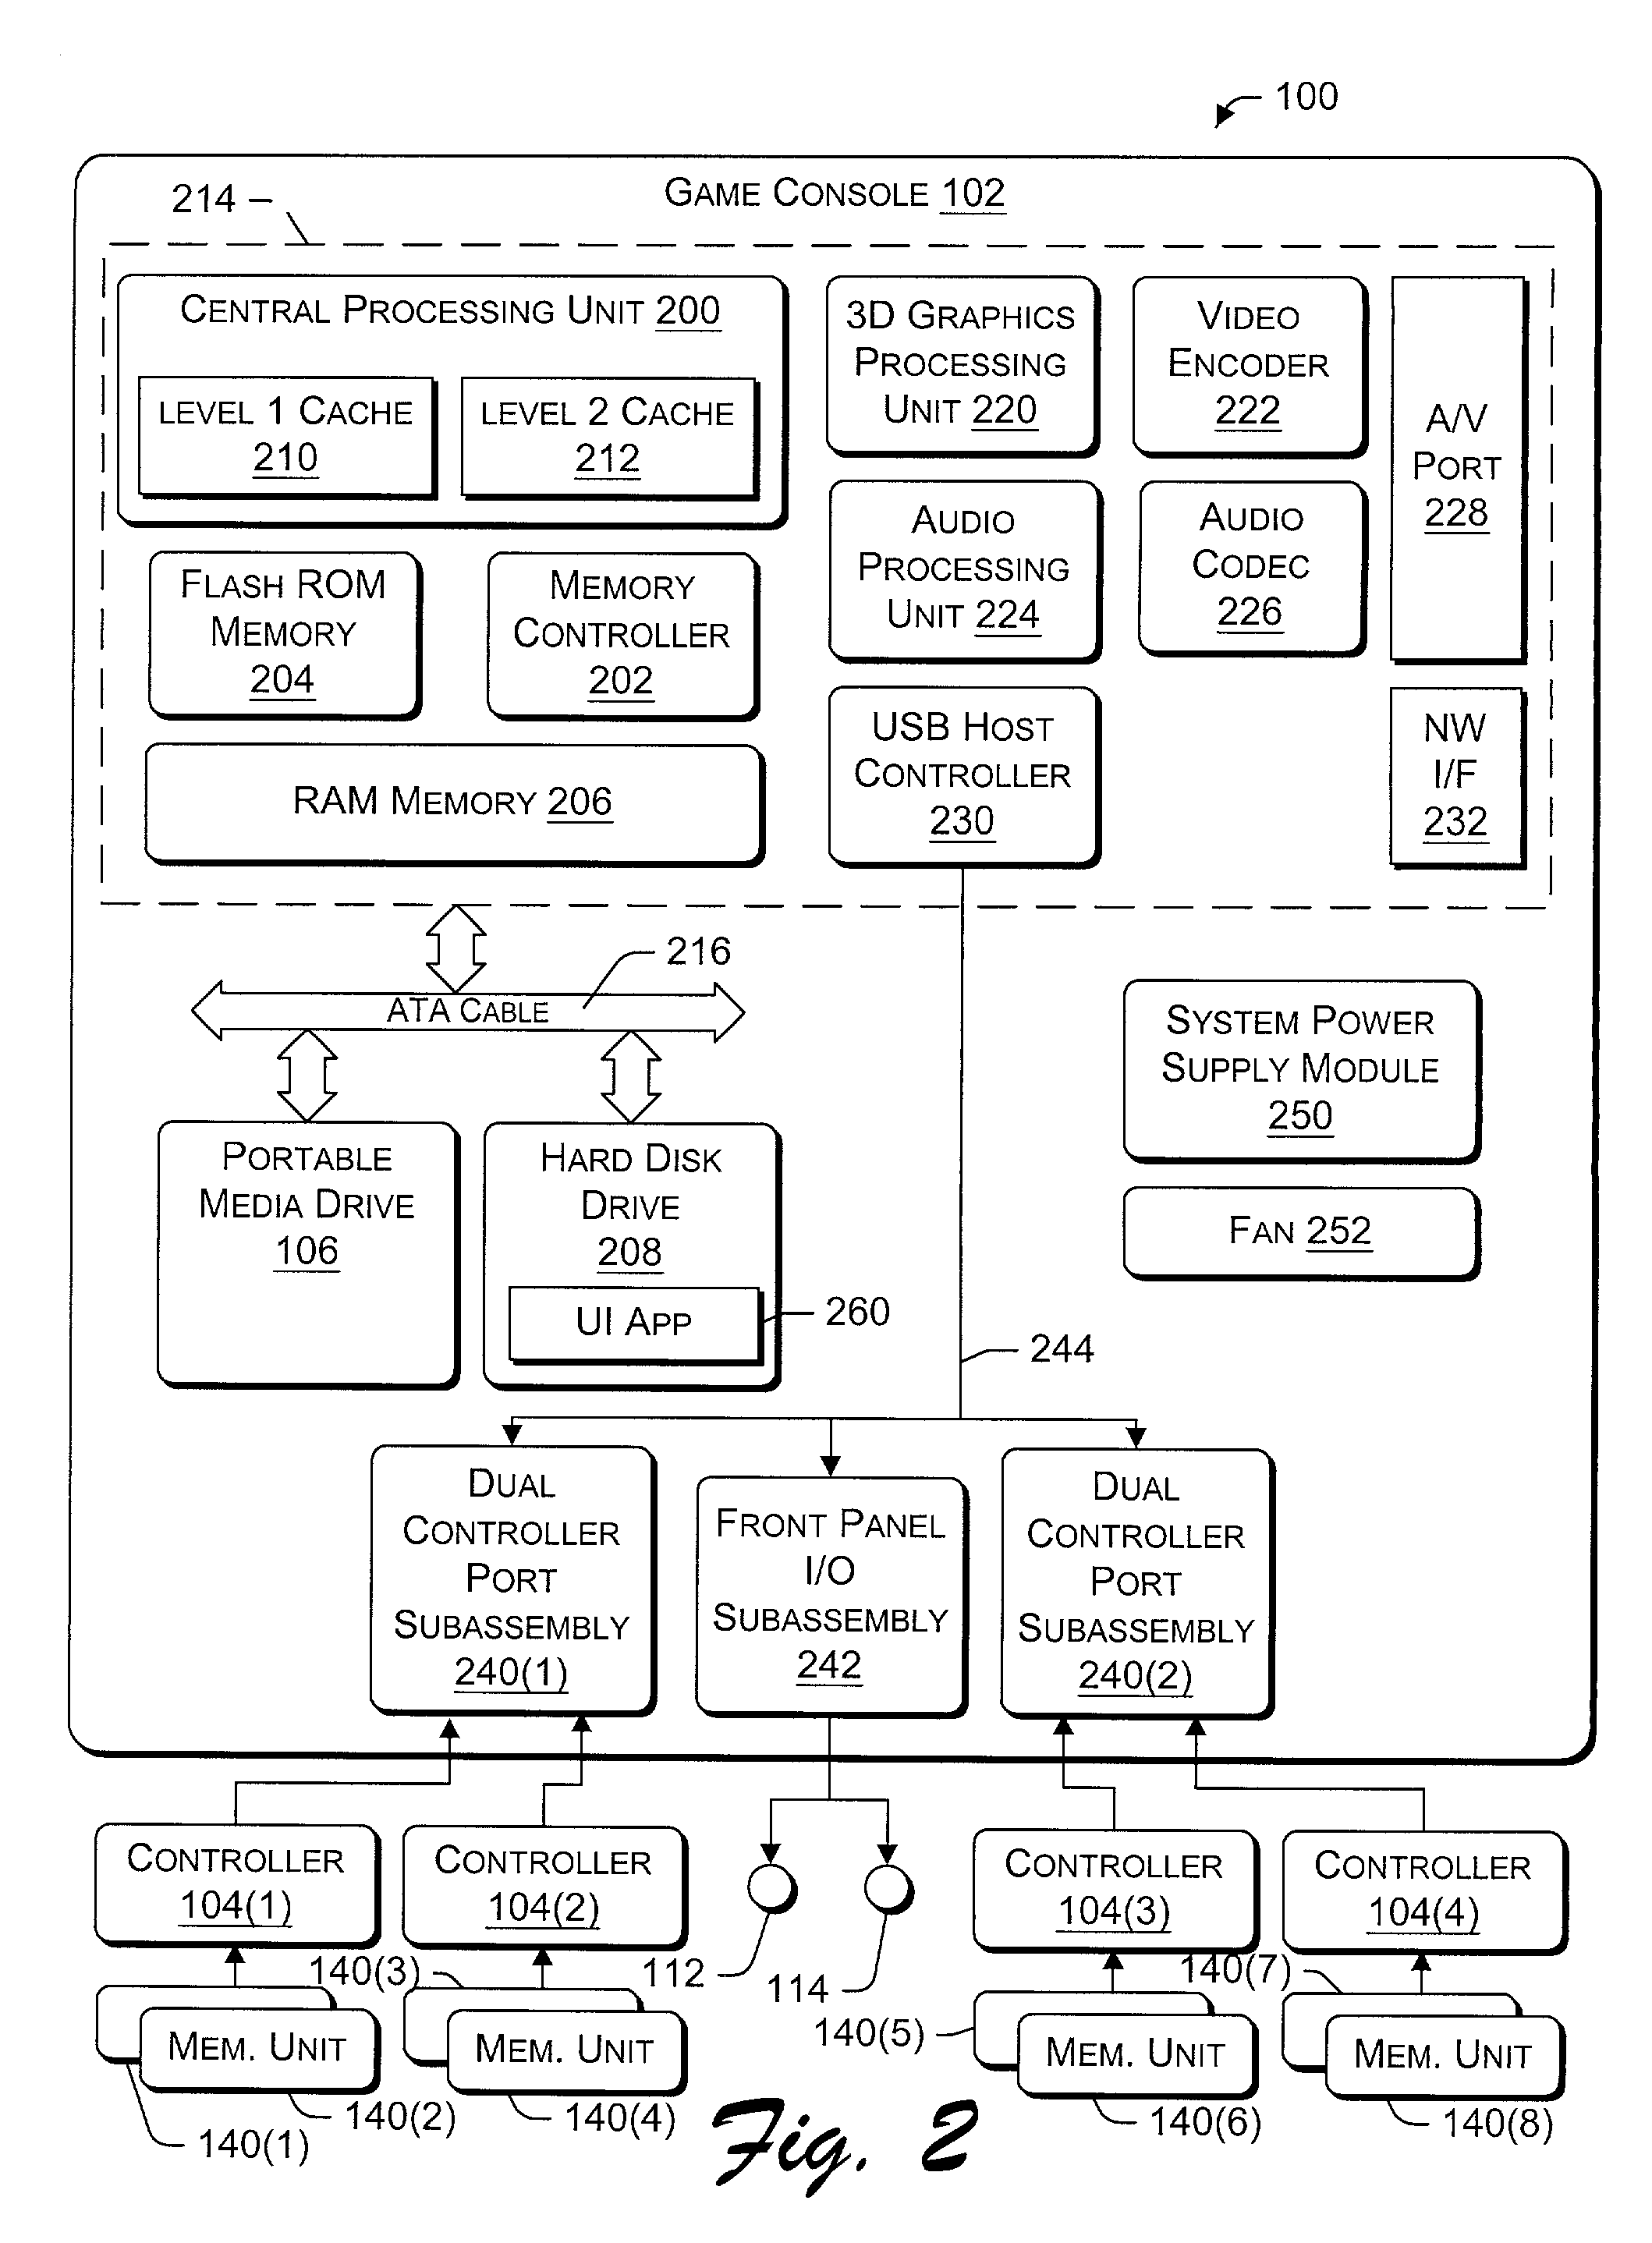 Method and apparatus for managing data in a gaming system